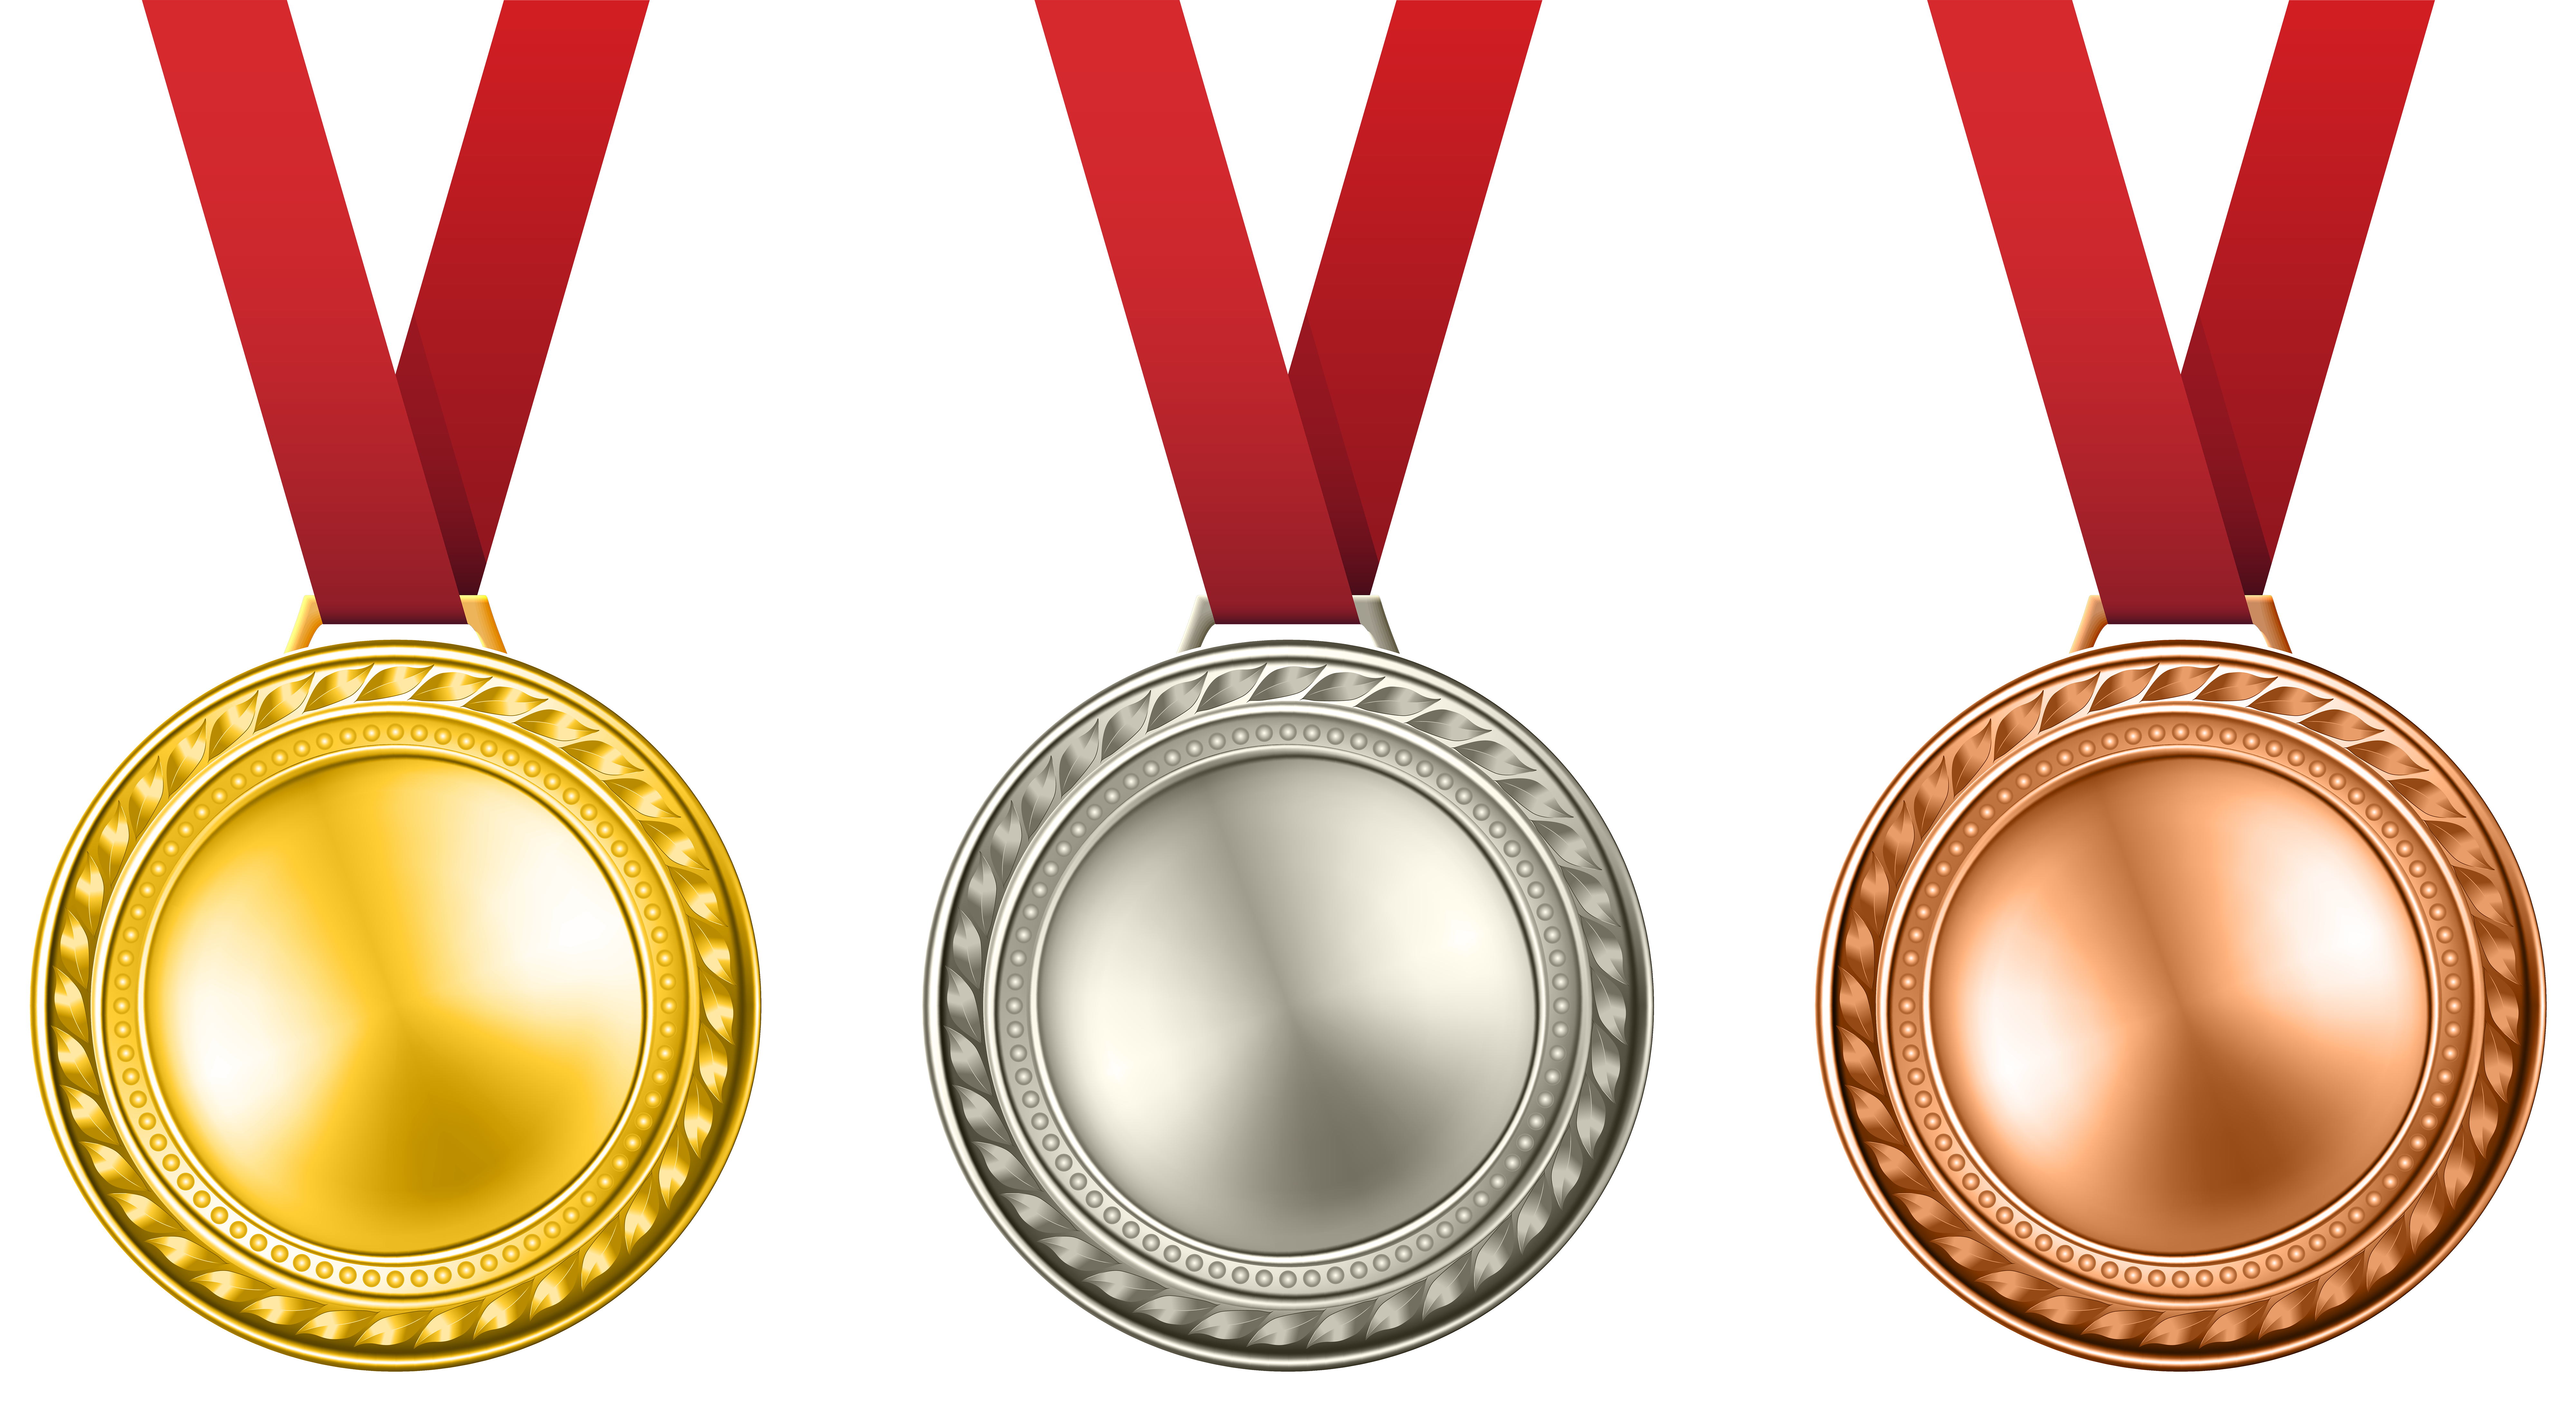 gold medals clipart - photo #29